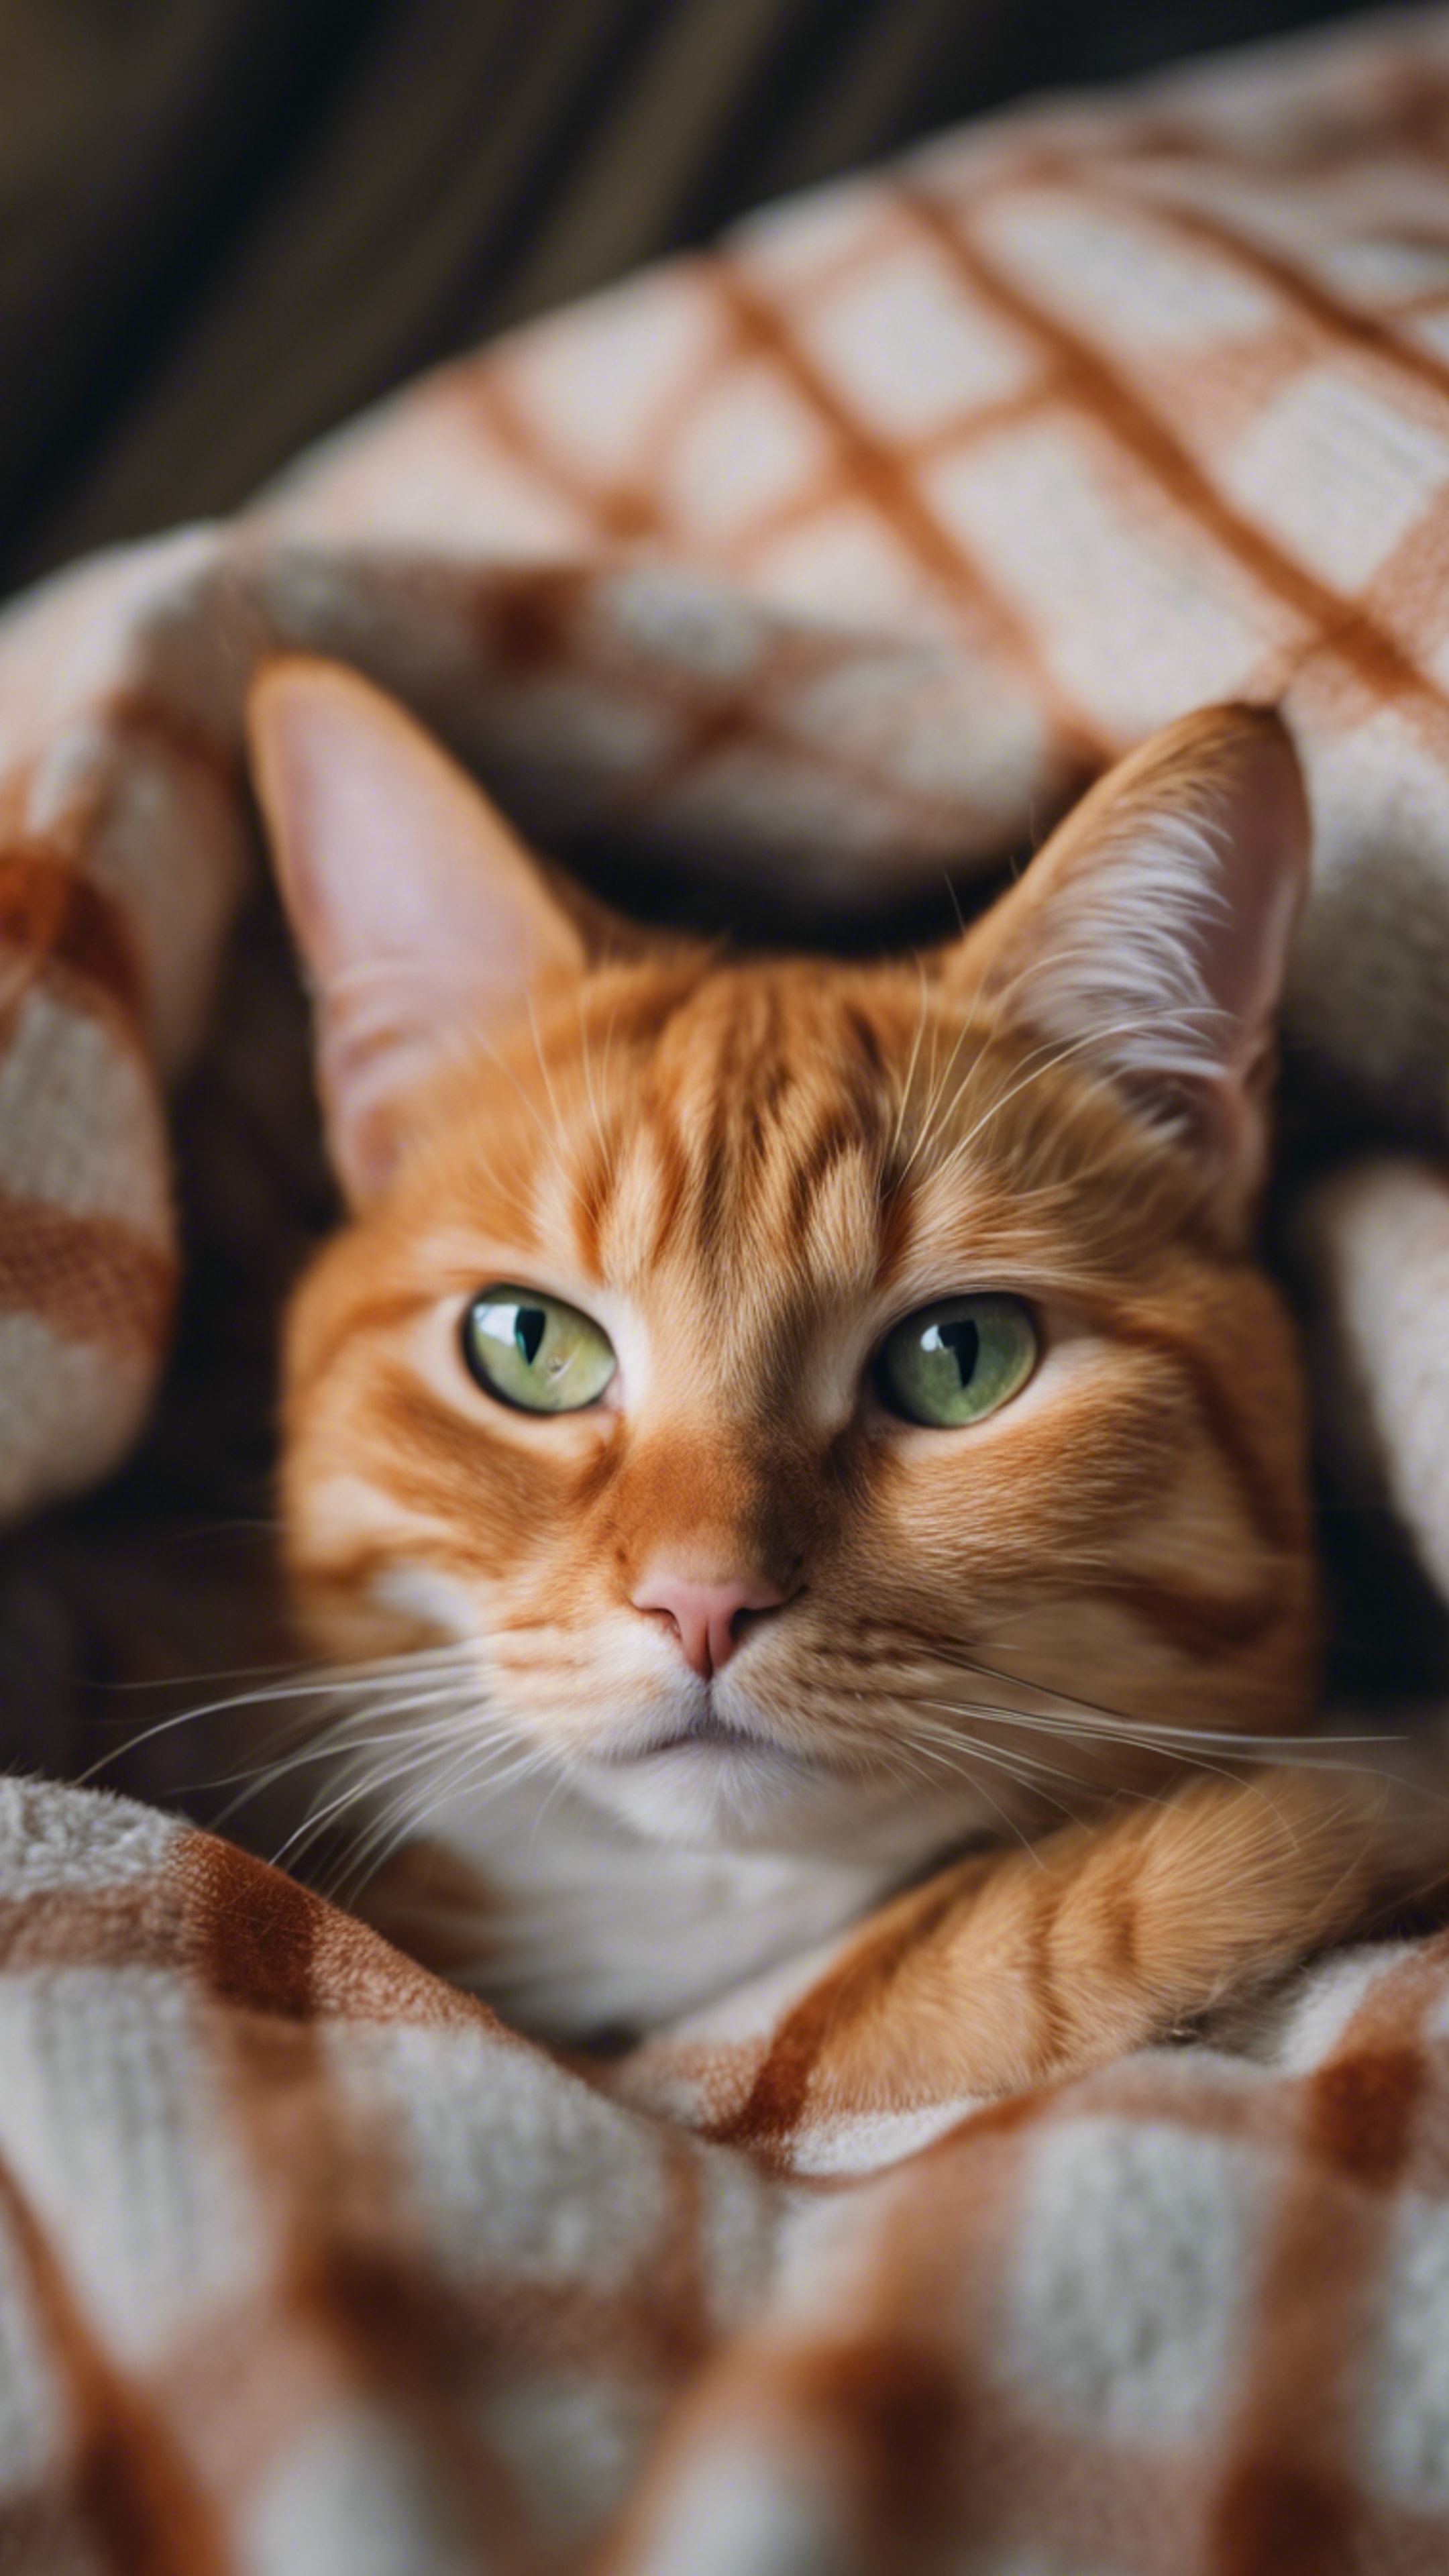 A close up of an orange tabby cat curled up on a cozy plaid blanket, purring gently, with a playful glint in its eyes. Wallpaper[45e4538616504ff6a891]